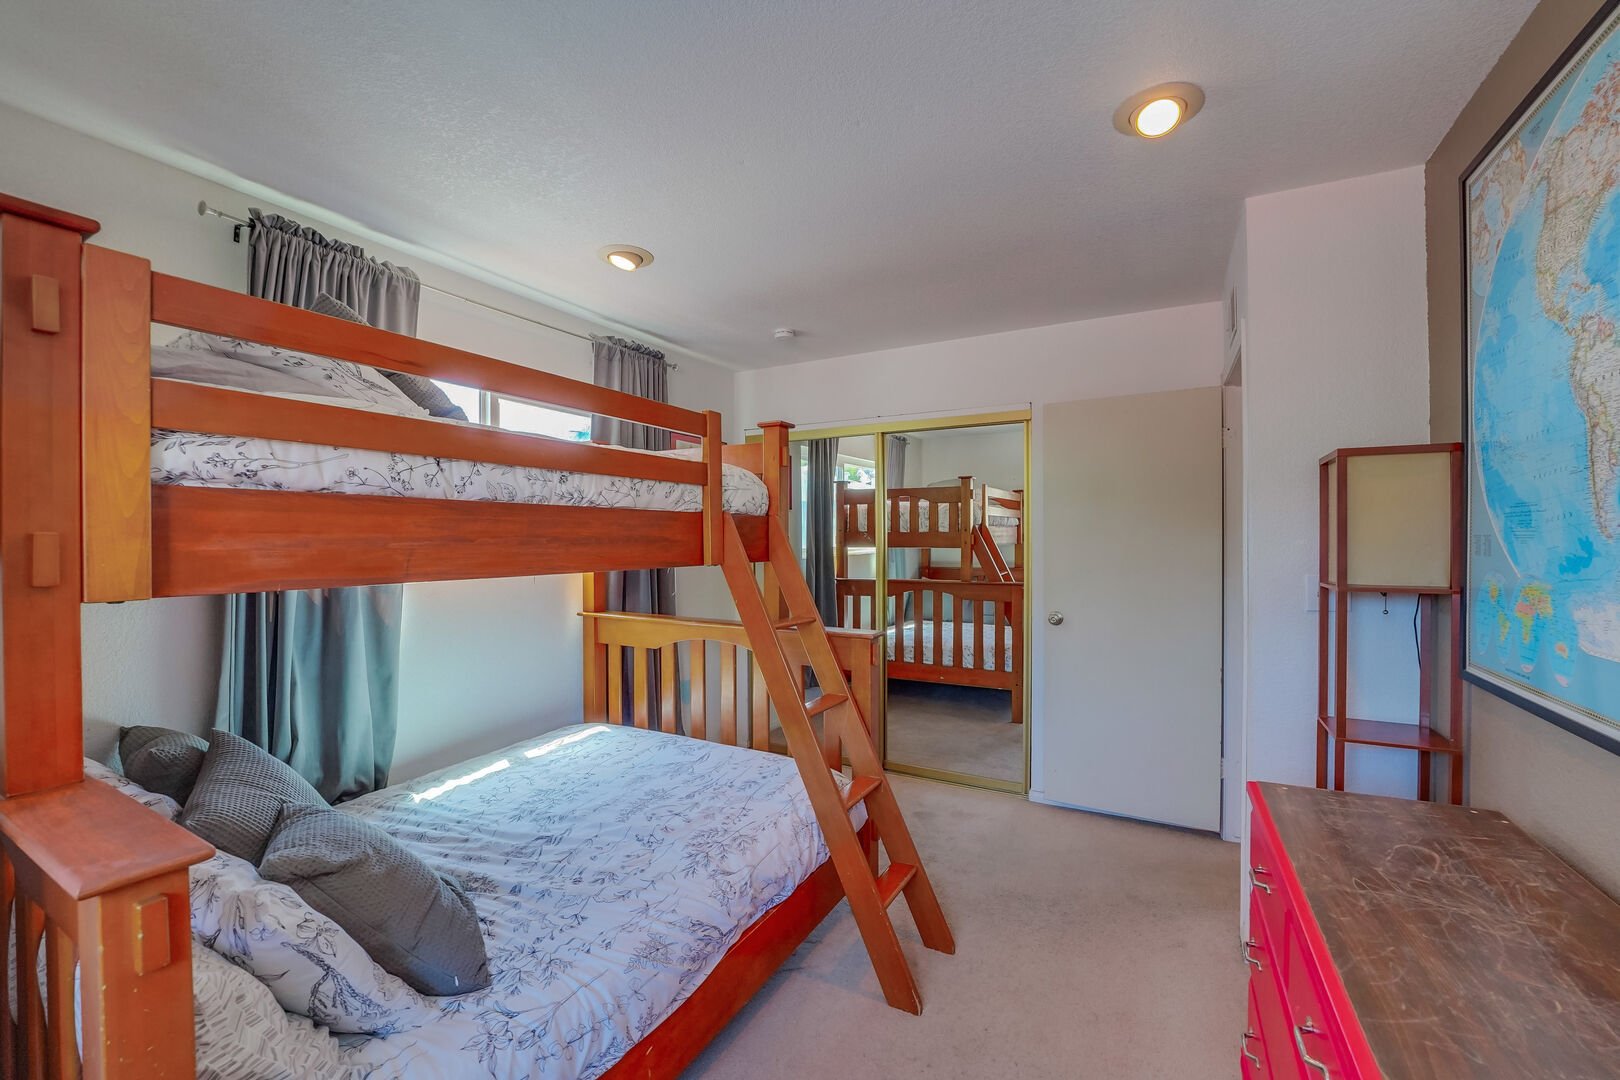 Second private guest bedroom with bunk bed with twin and full beds, dresser, and mirrored closet